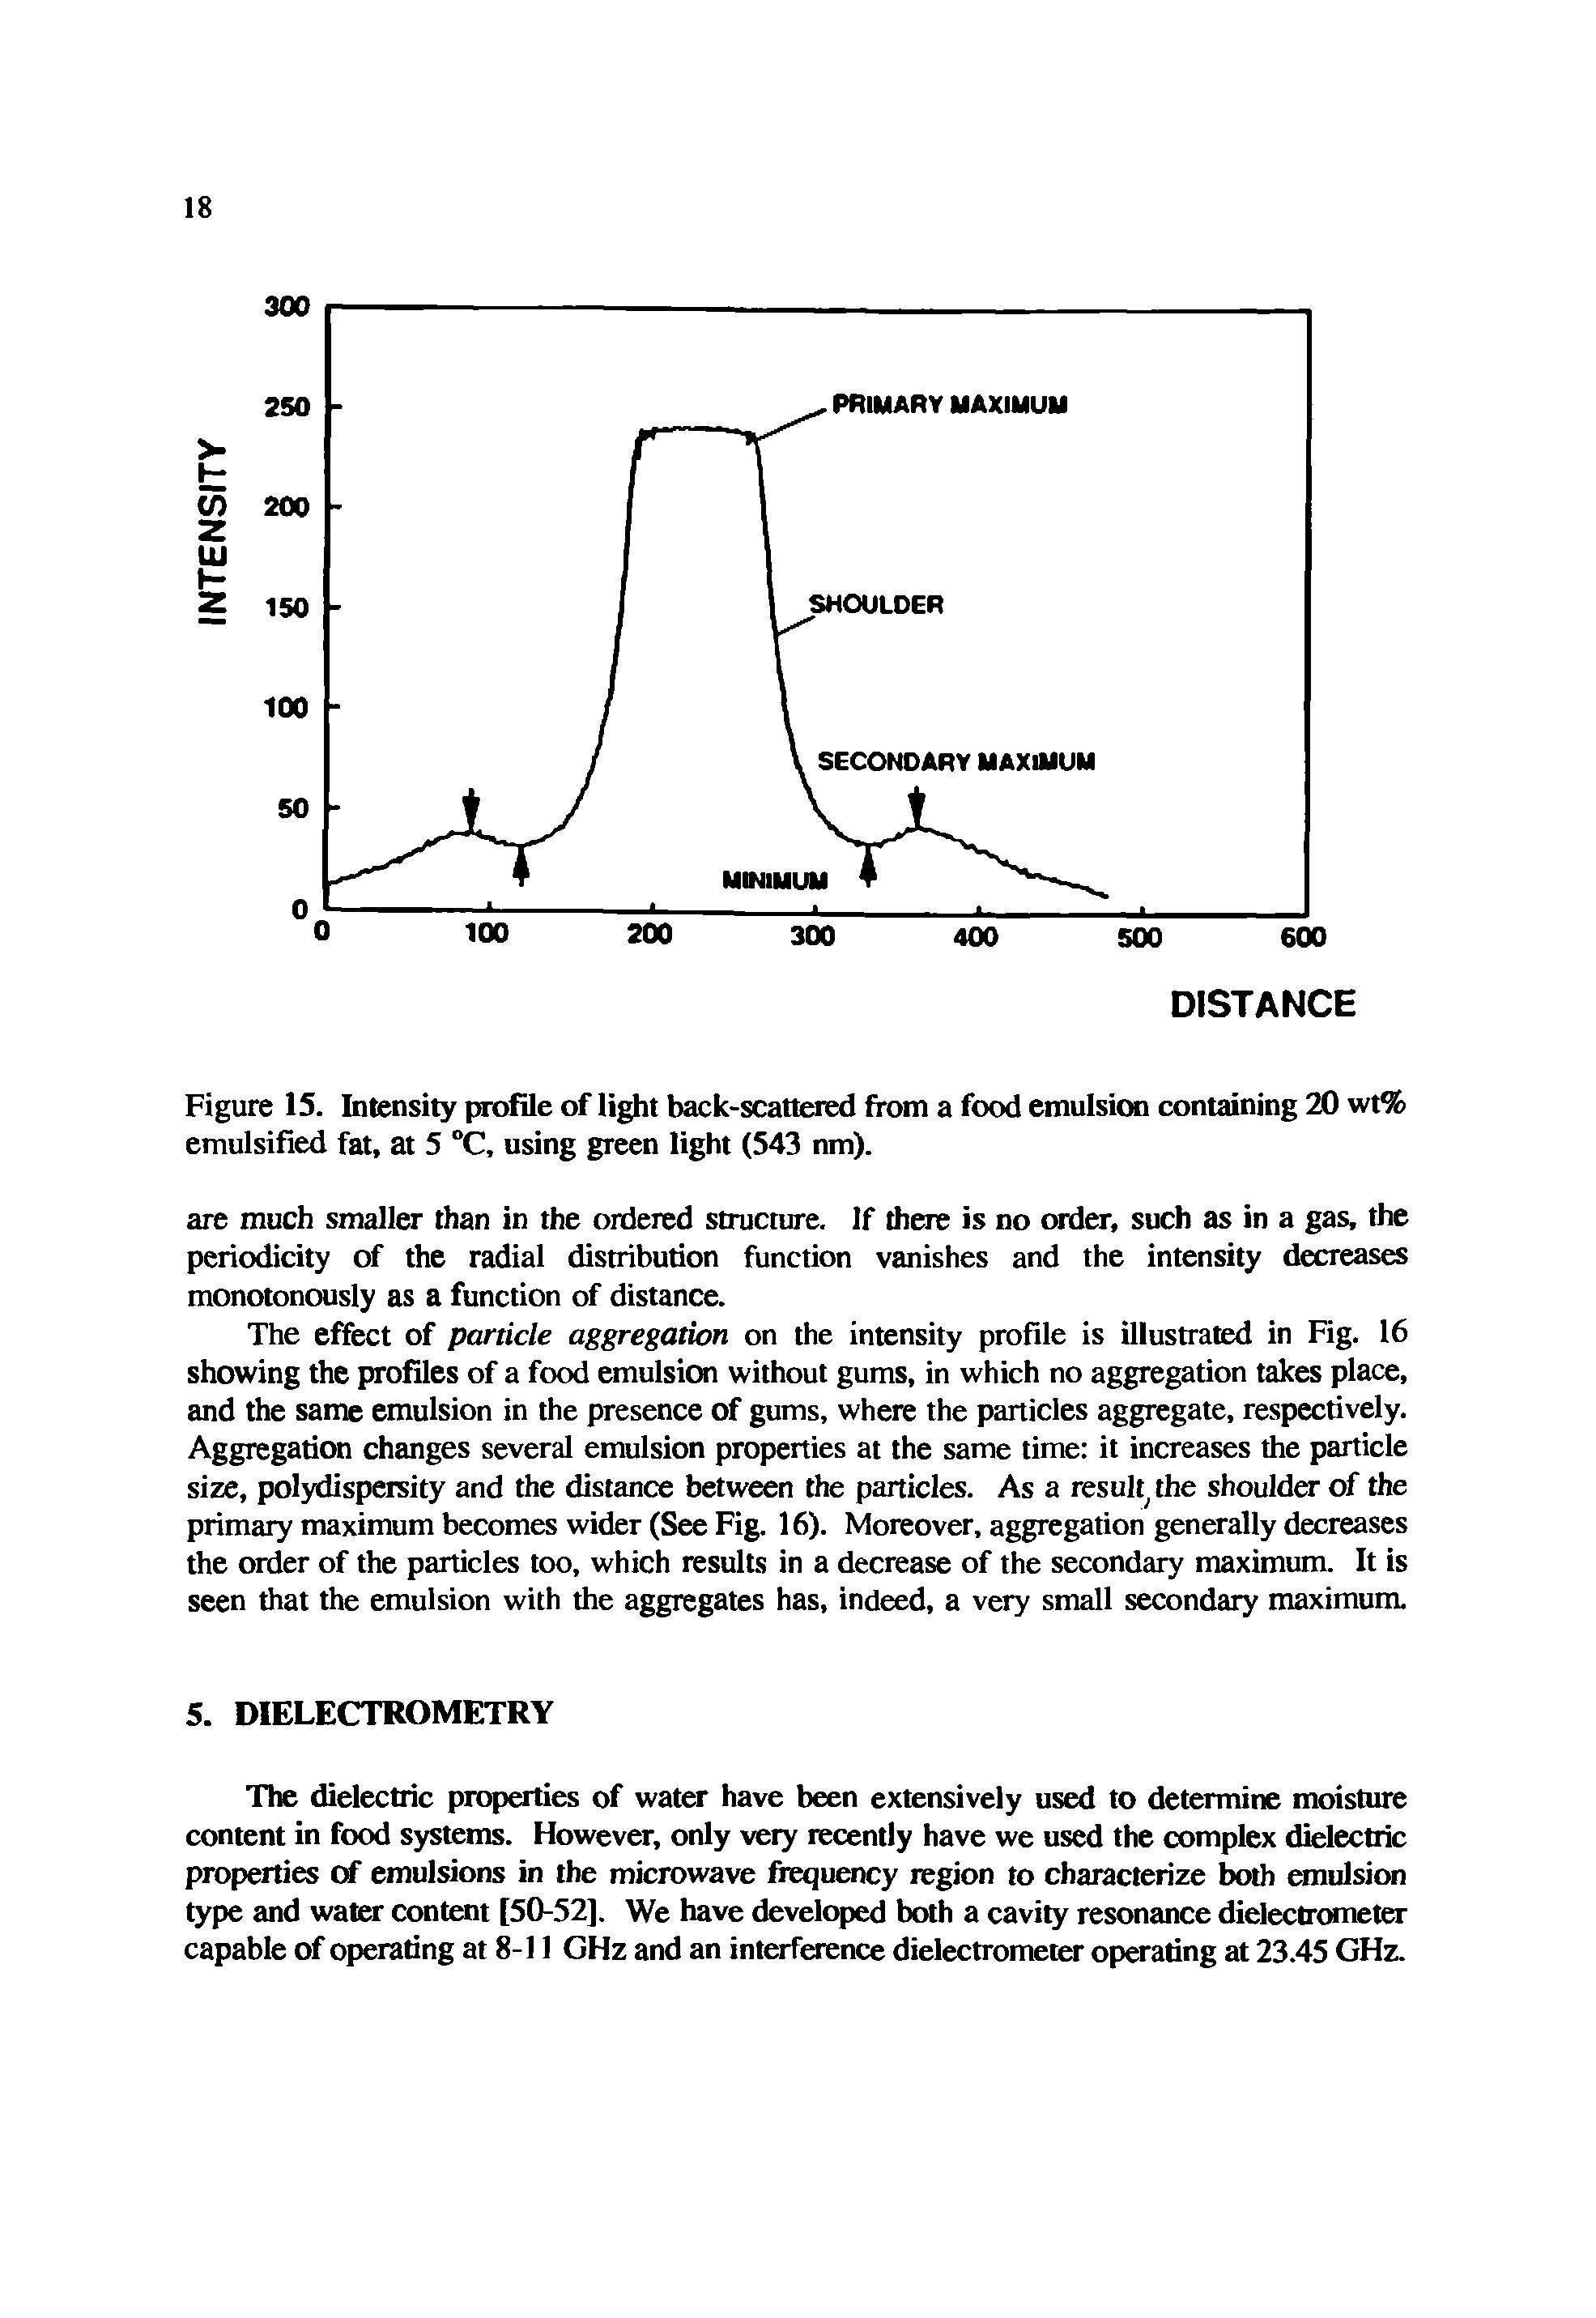 Figure 15. Intensity profile of light back-scattered from a food emulsion containing 20 wt% emulsified fat, at 5 °C, using green light (543 nm).